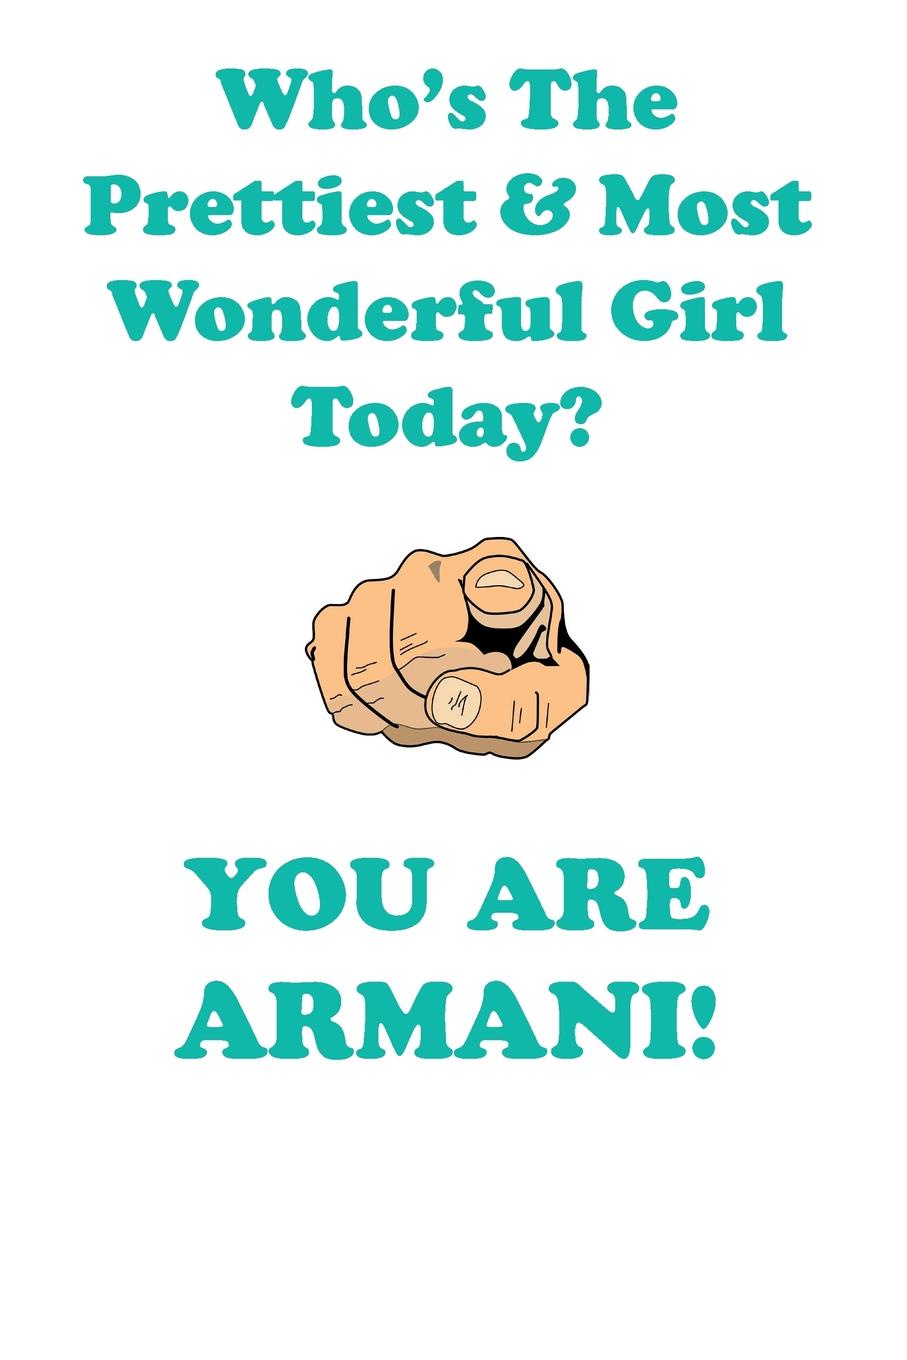 ARMANI is The Prettiest Affirmations Workbook Positive Affirmations Workbook Includes. Mentoring Questions, Guidance, Supporting You